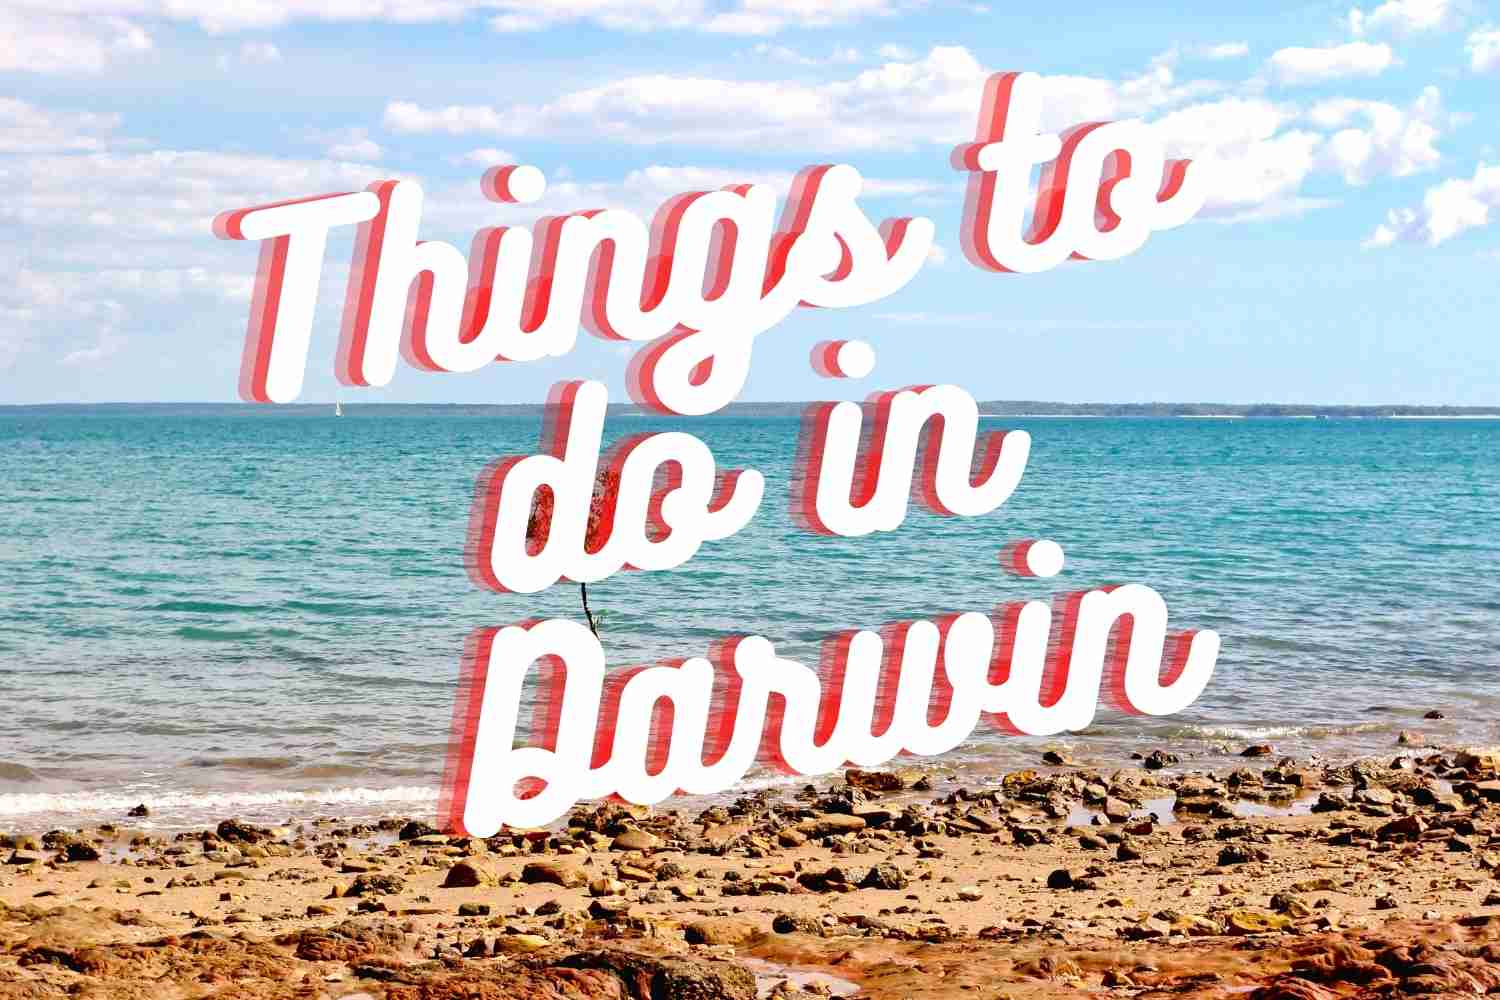 Things to do in Darwin with kids